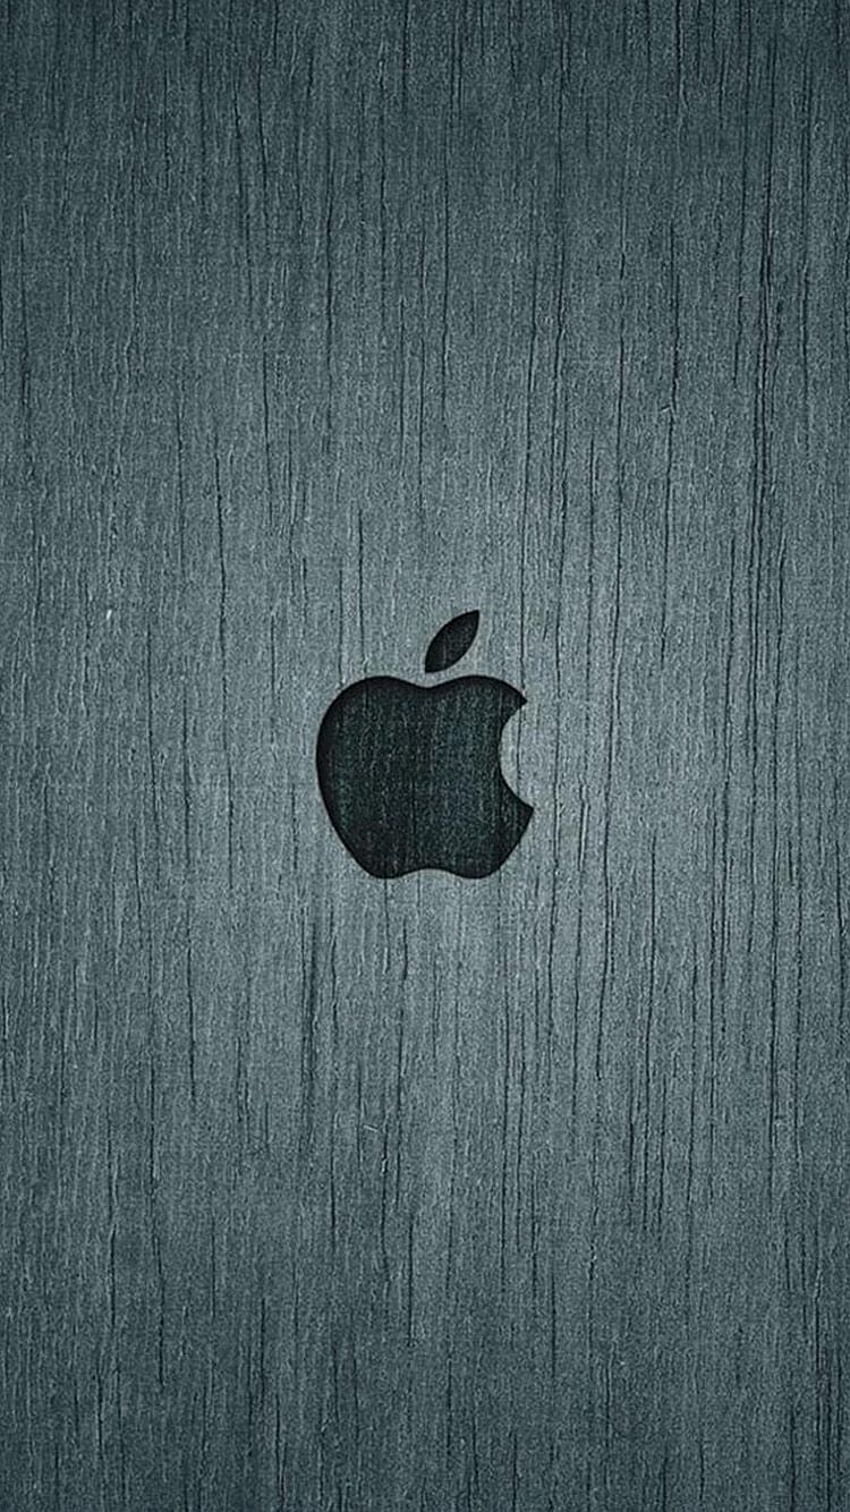 Apple iPhone 6 , 50 Apple iPhone 6 Android Compatible HD phone wallpaper